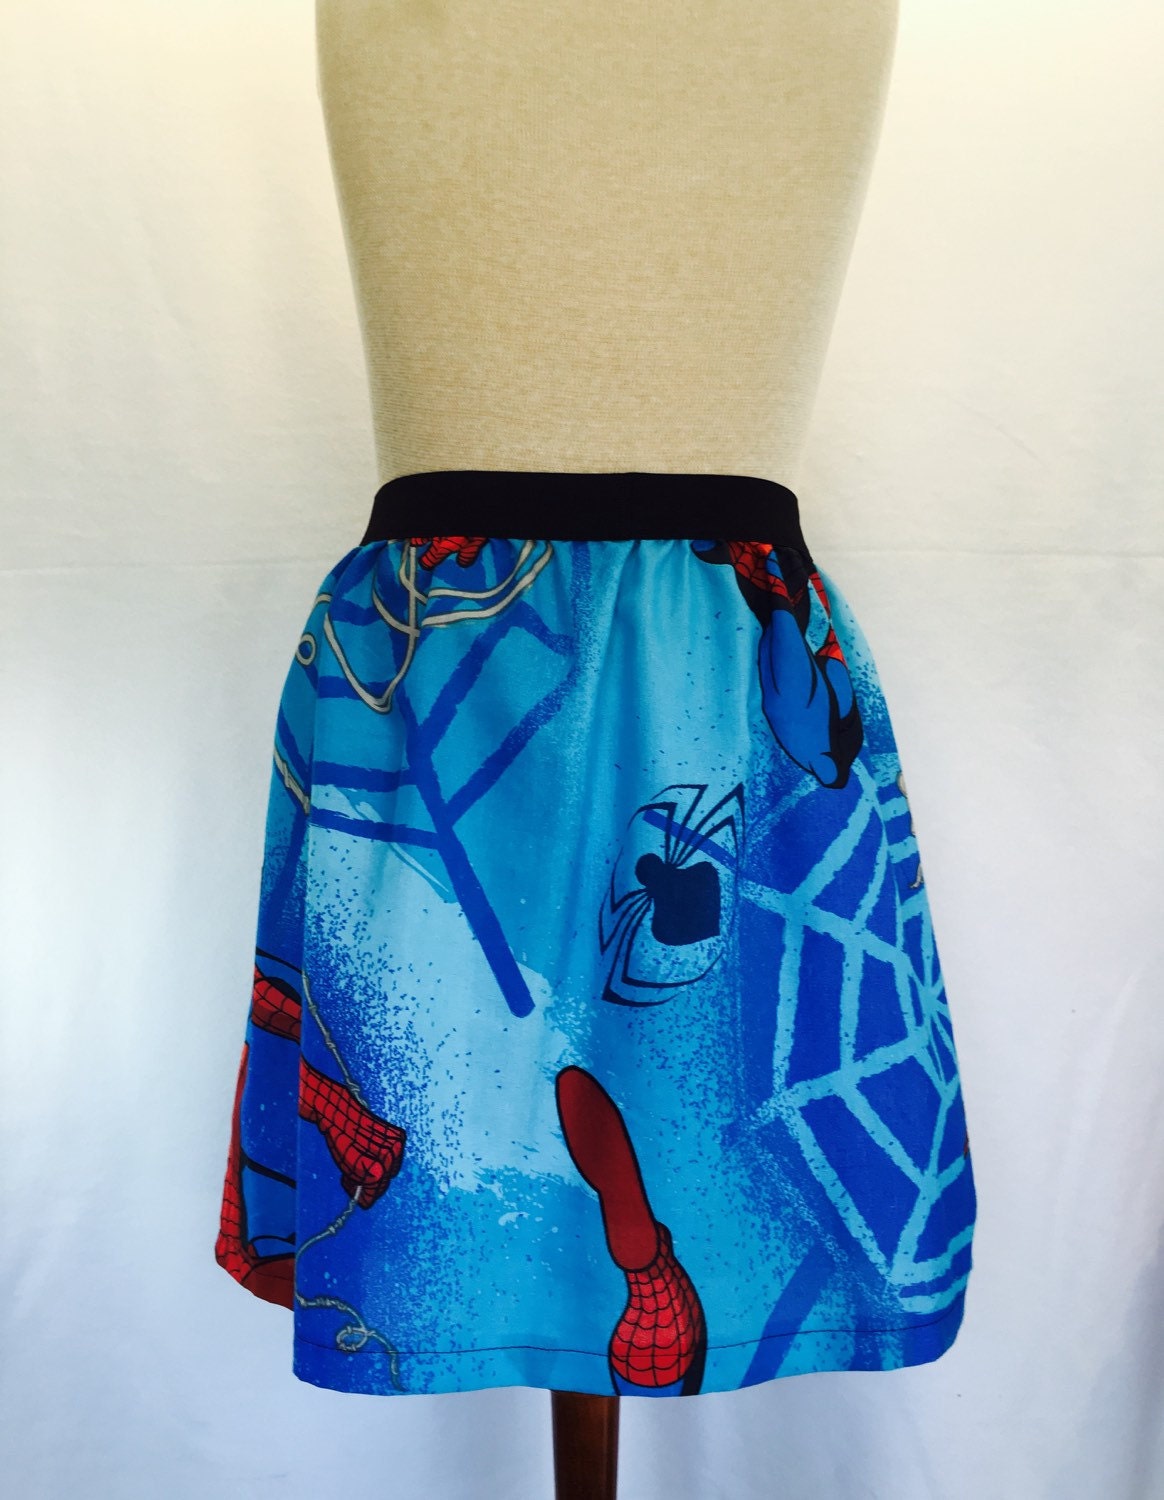 Spiderman Ladies Skirt from upcycled